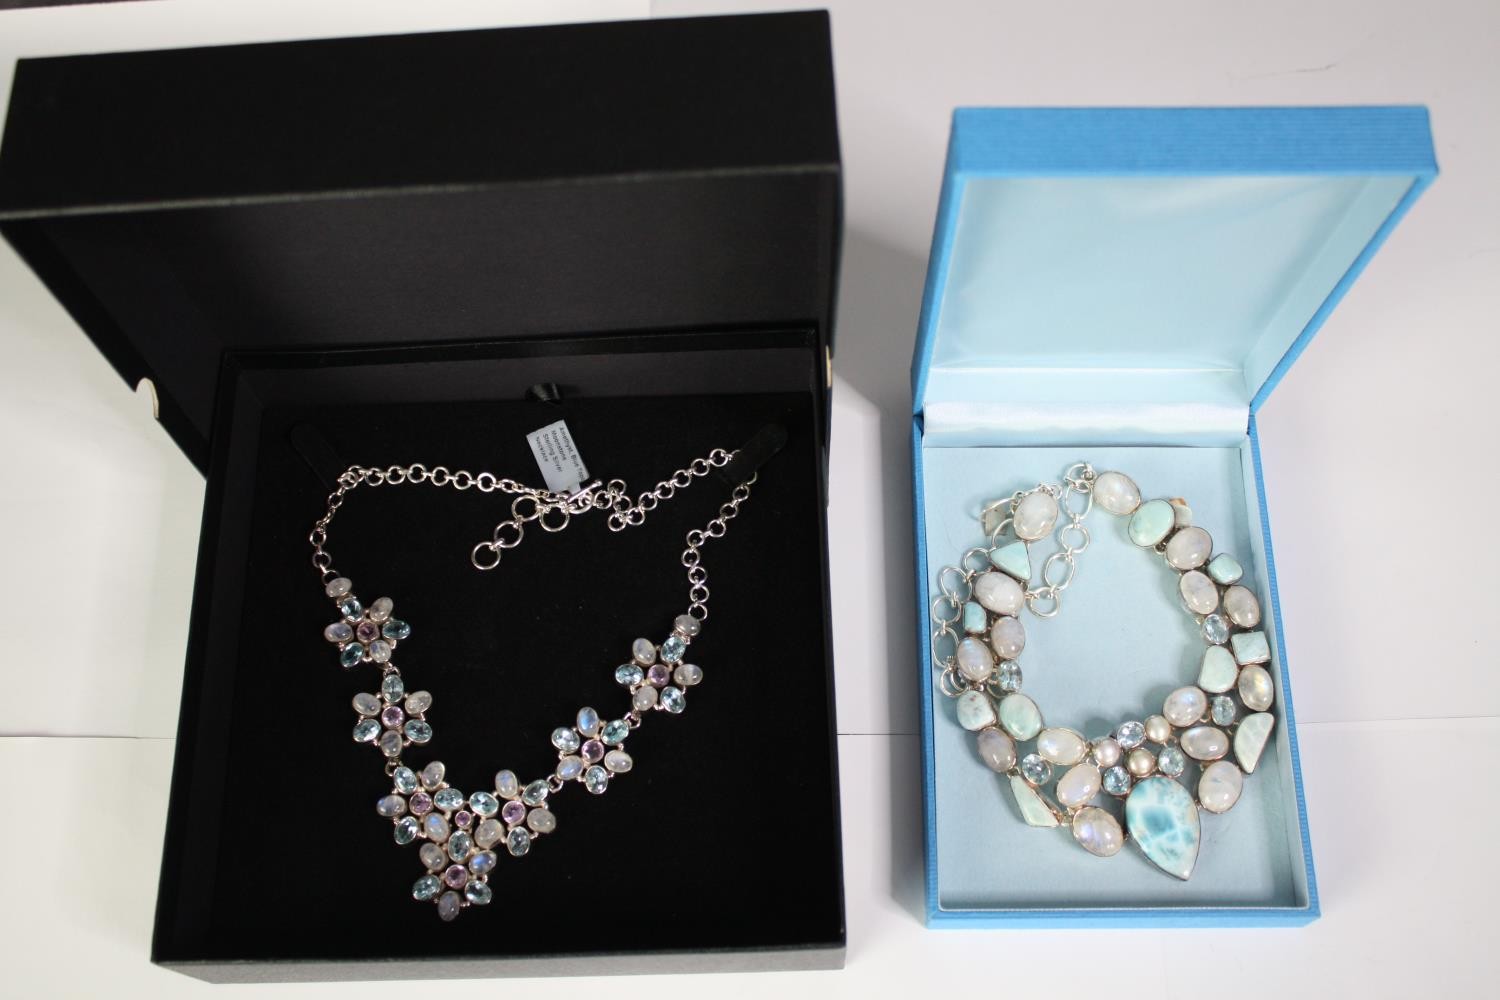 Two boxed statement articulated silver and gemstone necklaces. One of a floral design set with